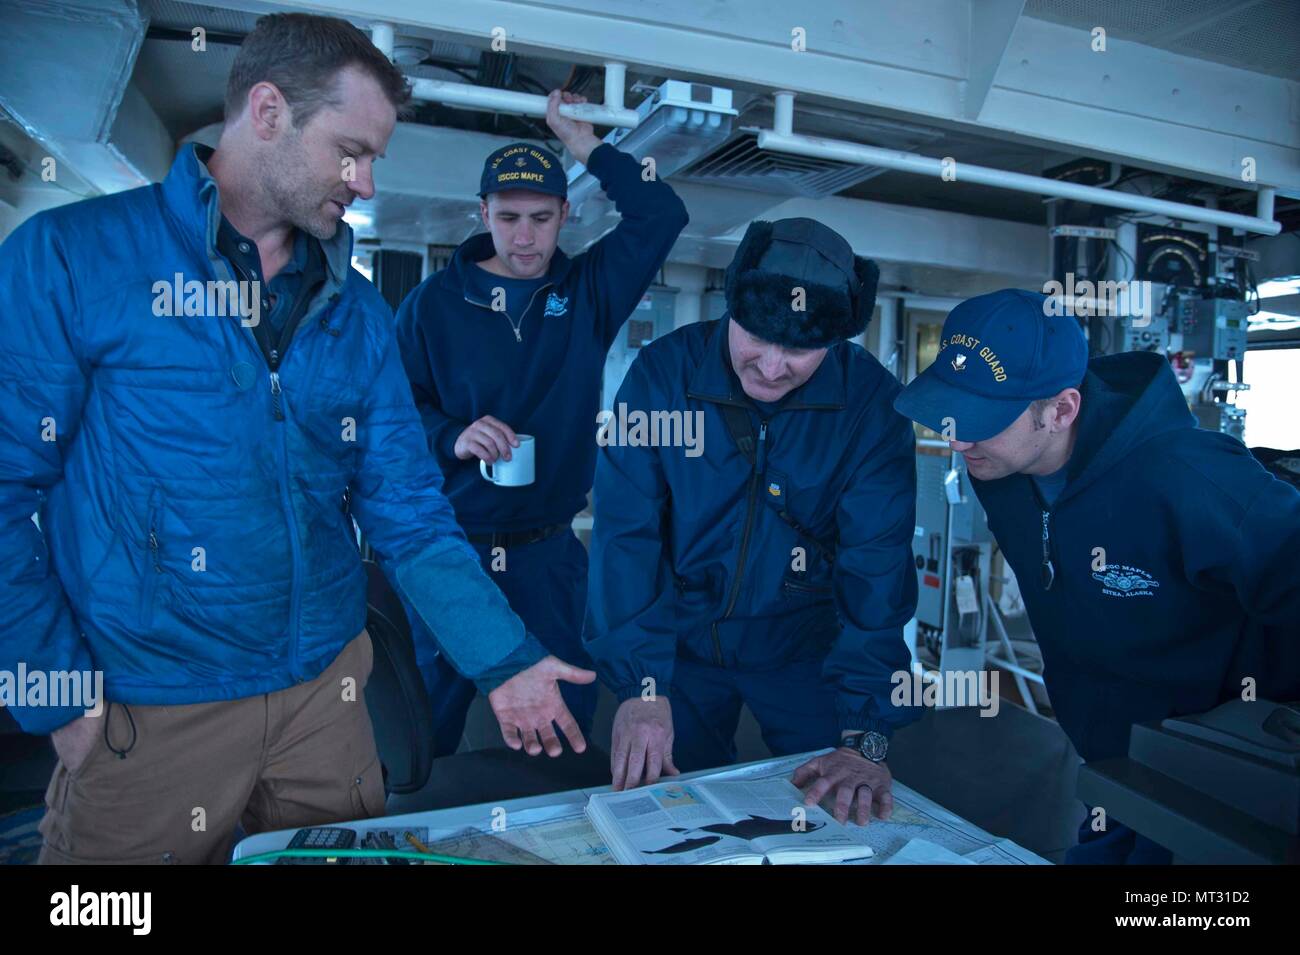 Scripps Institution of Oceanography scientist Joshua Jones (left) gives training on bowhead whales to watchstanders on the bridge aboard the Coast Guard Cutter Maple (WLB 207) underway in the Beaufort Sea, Alaska, on the cutter crew's historic voyage up through the Northwest Passage, July 22, 2017. The crew assisted Jones with zooplankton collection to analyze the abundance of the bowhead's food source. U.S. Coast Guard photo by Petty Officer 2nd Class Nathan Littlejohn. Stock Photo